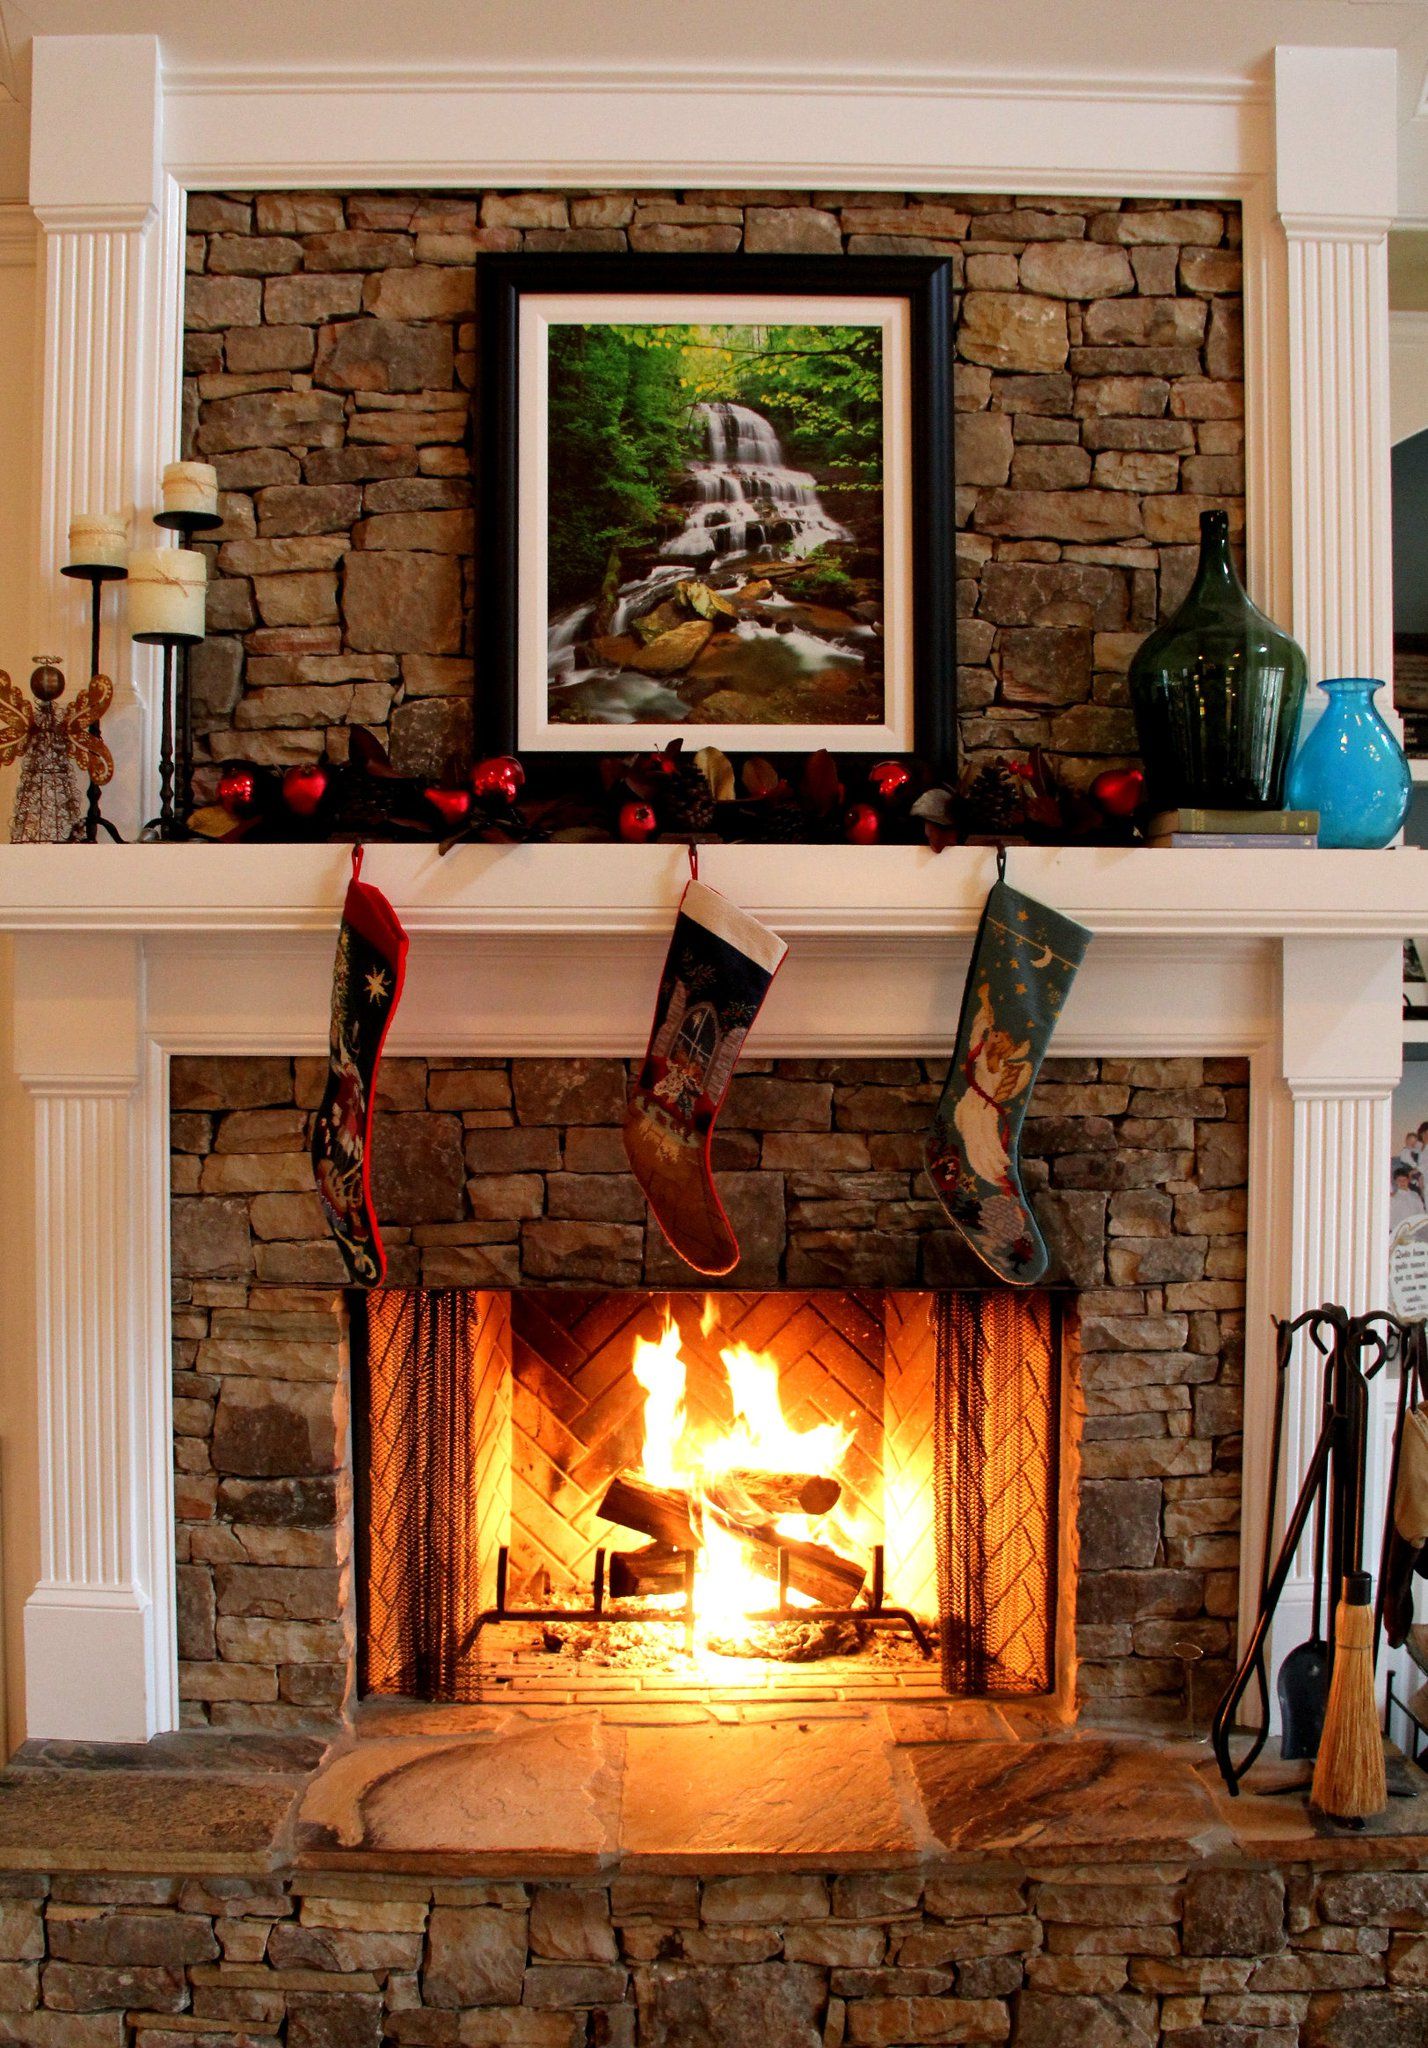 Cover Brick Fireplace with Stone Inspirational Pin On Decorating Ideas